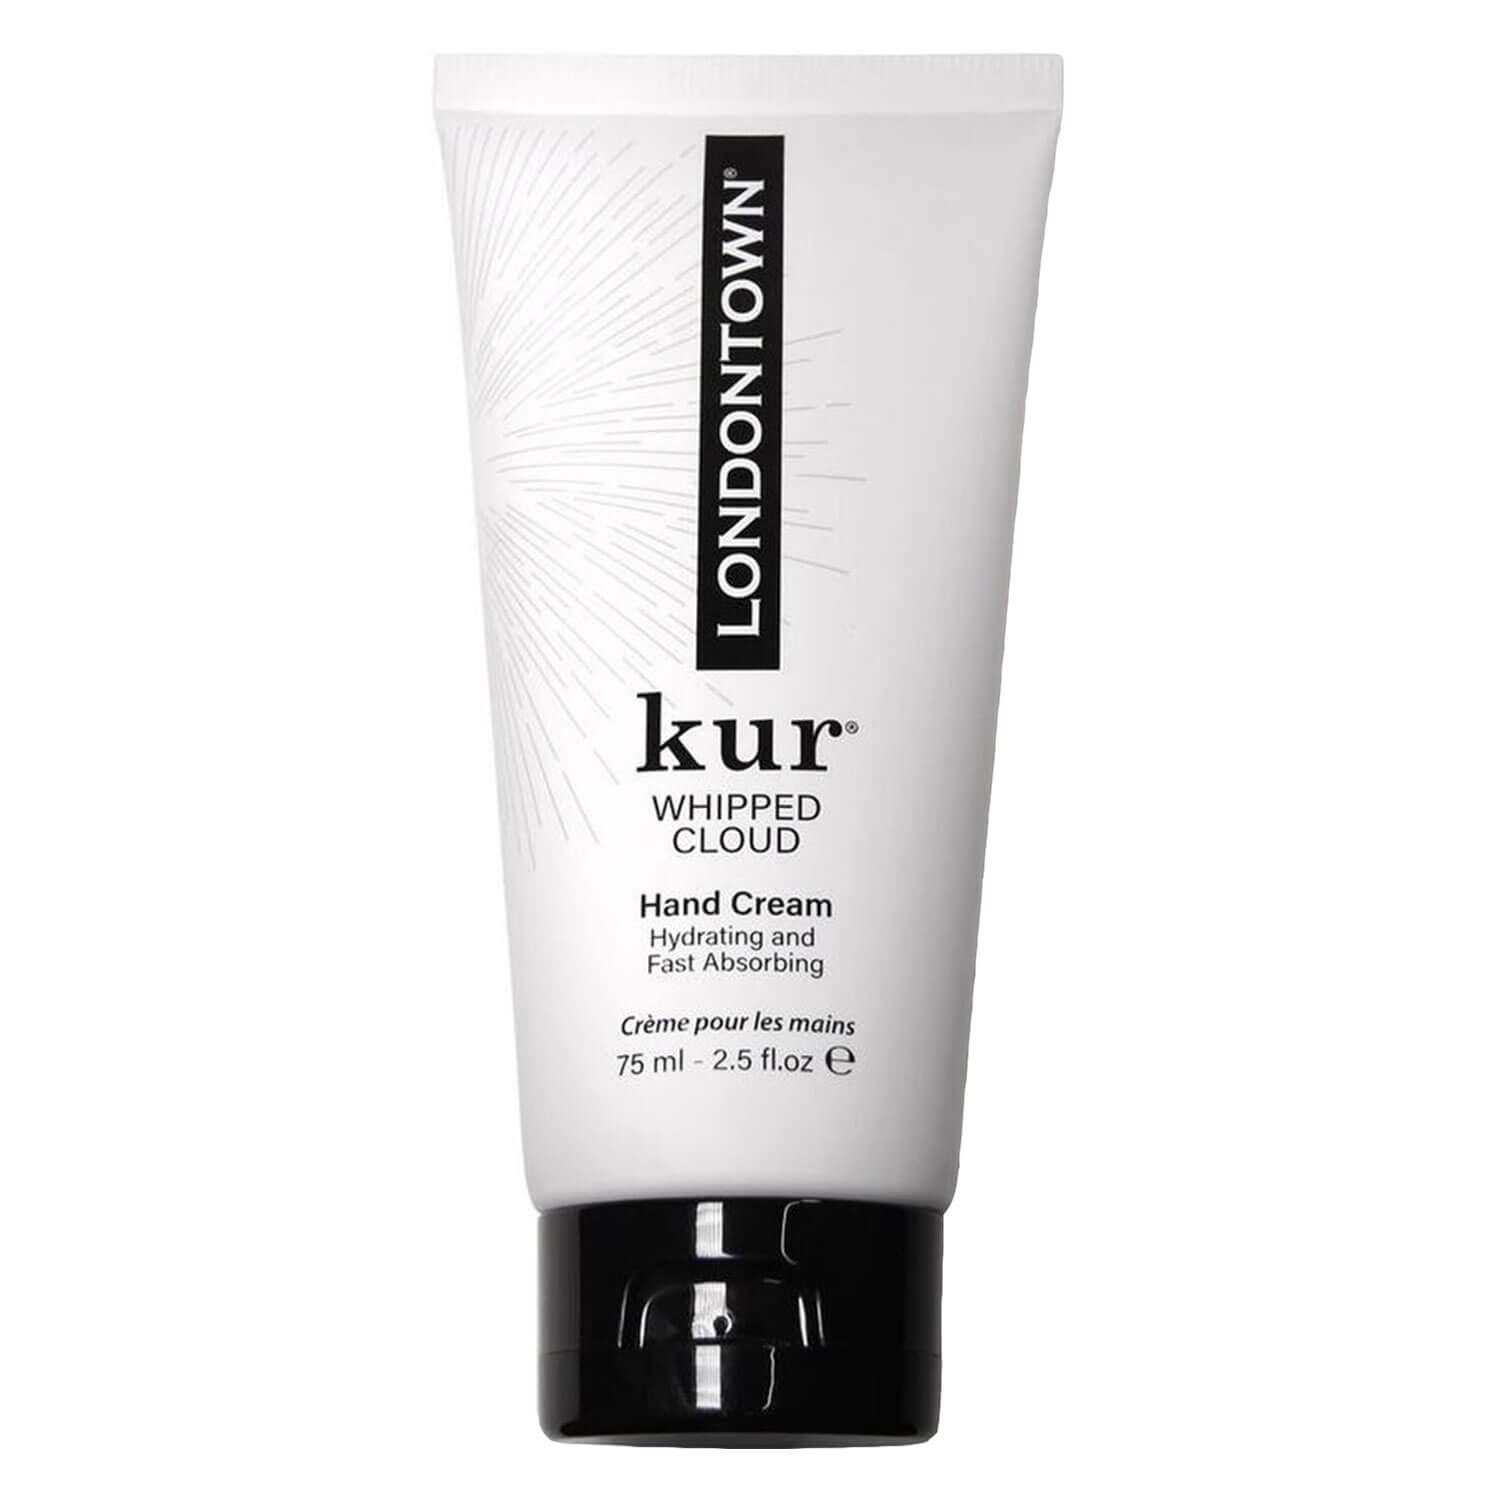 Product image from kur - Whipped Cloud Hand Cream